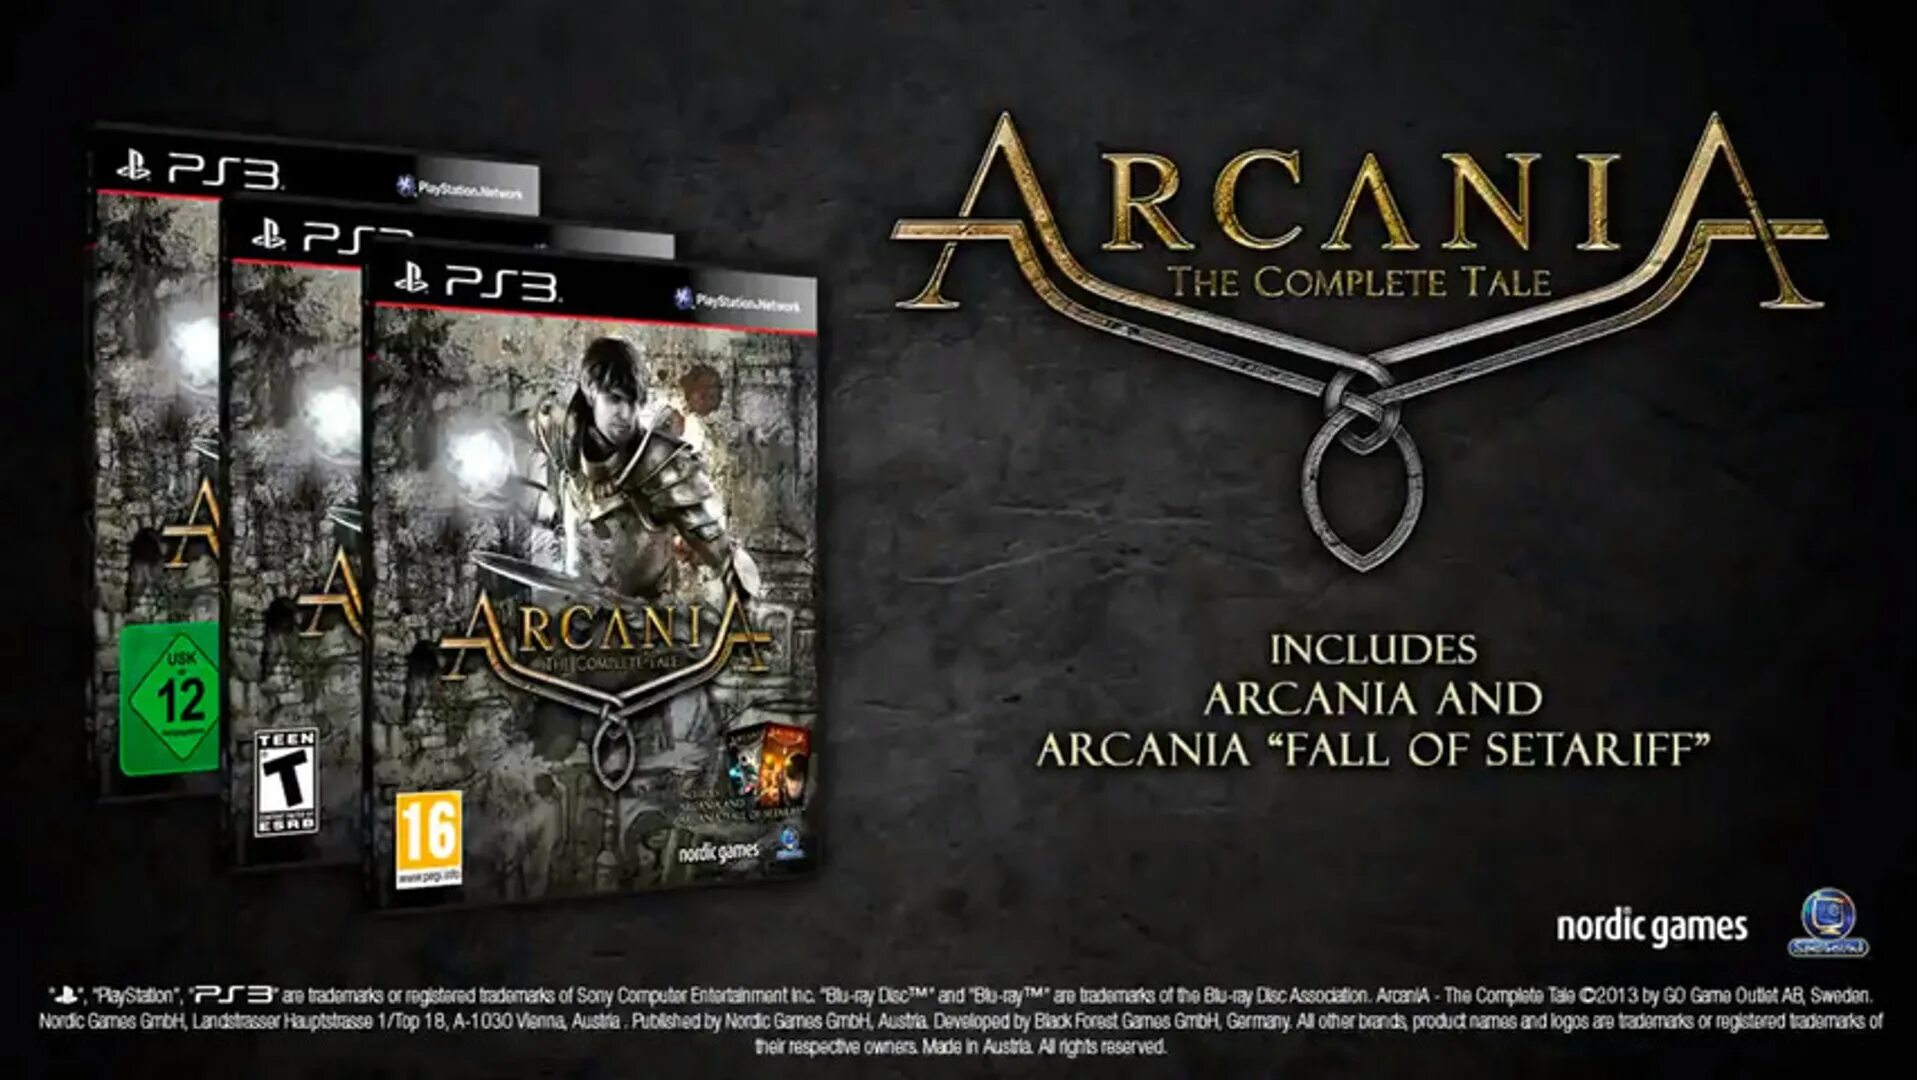 Arcania ps3. Arcania the complete Tale ps3. Arcania - the complete Tale (ps4). Arcania the complete Tale Xbox 360. Tales ps3